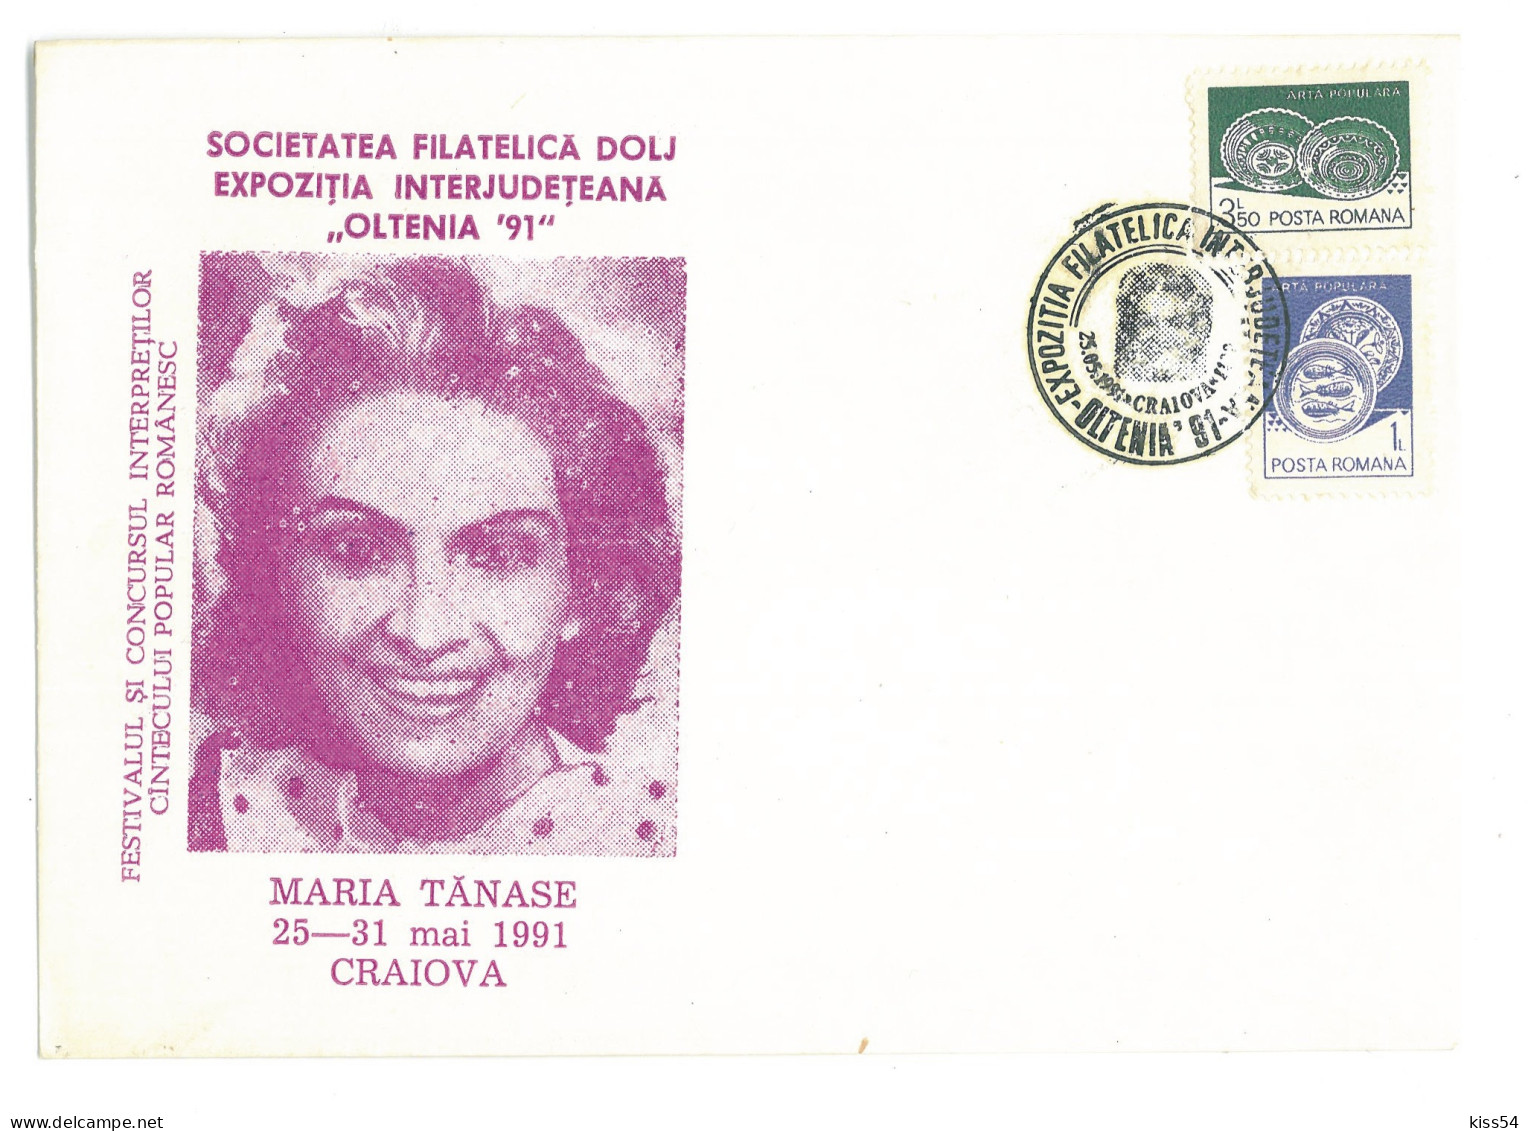 COV 88 - 3027 MARIA TANASE, The Popular Song, Romania - Cover - Used - 1991 - Covers & Documents